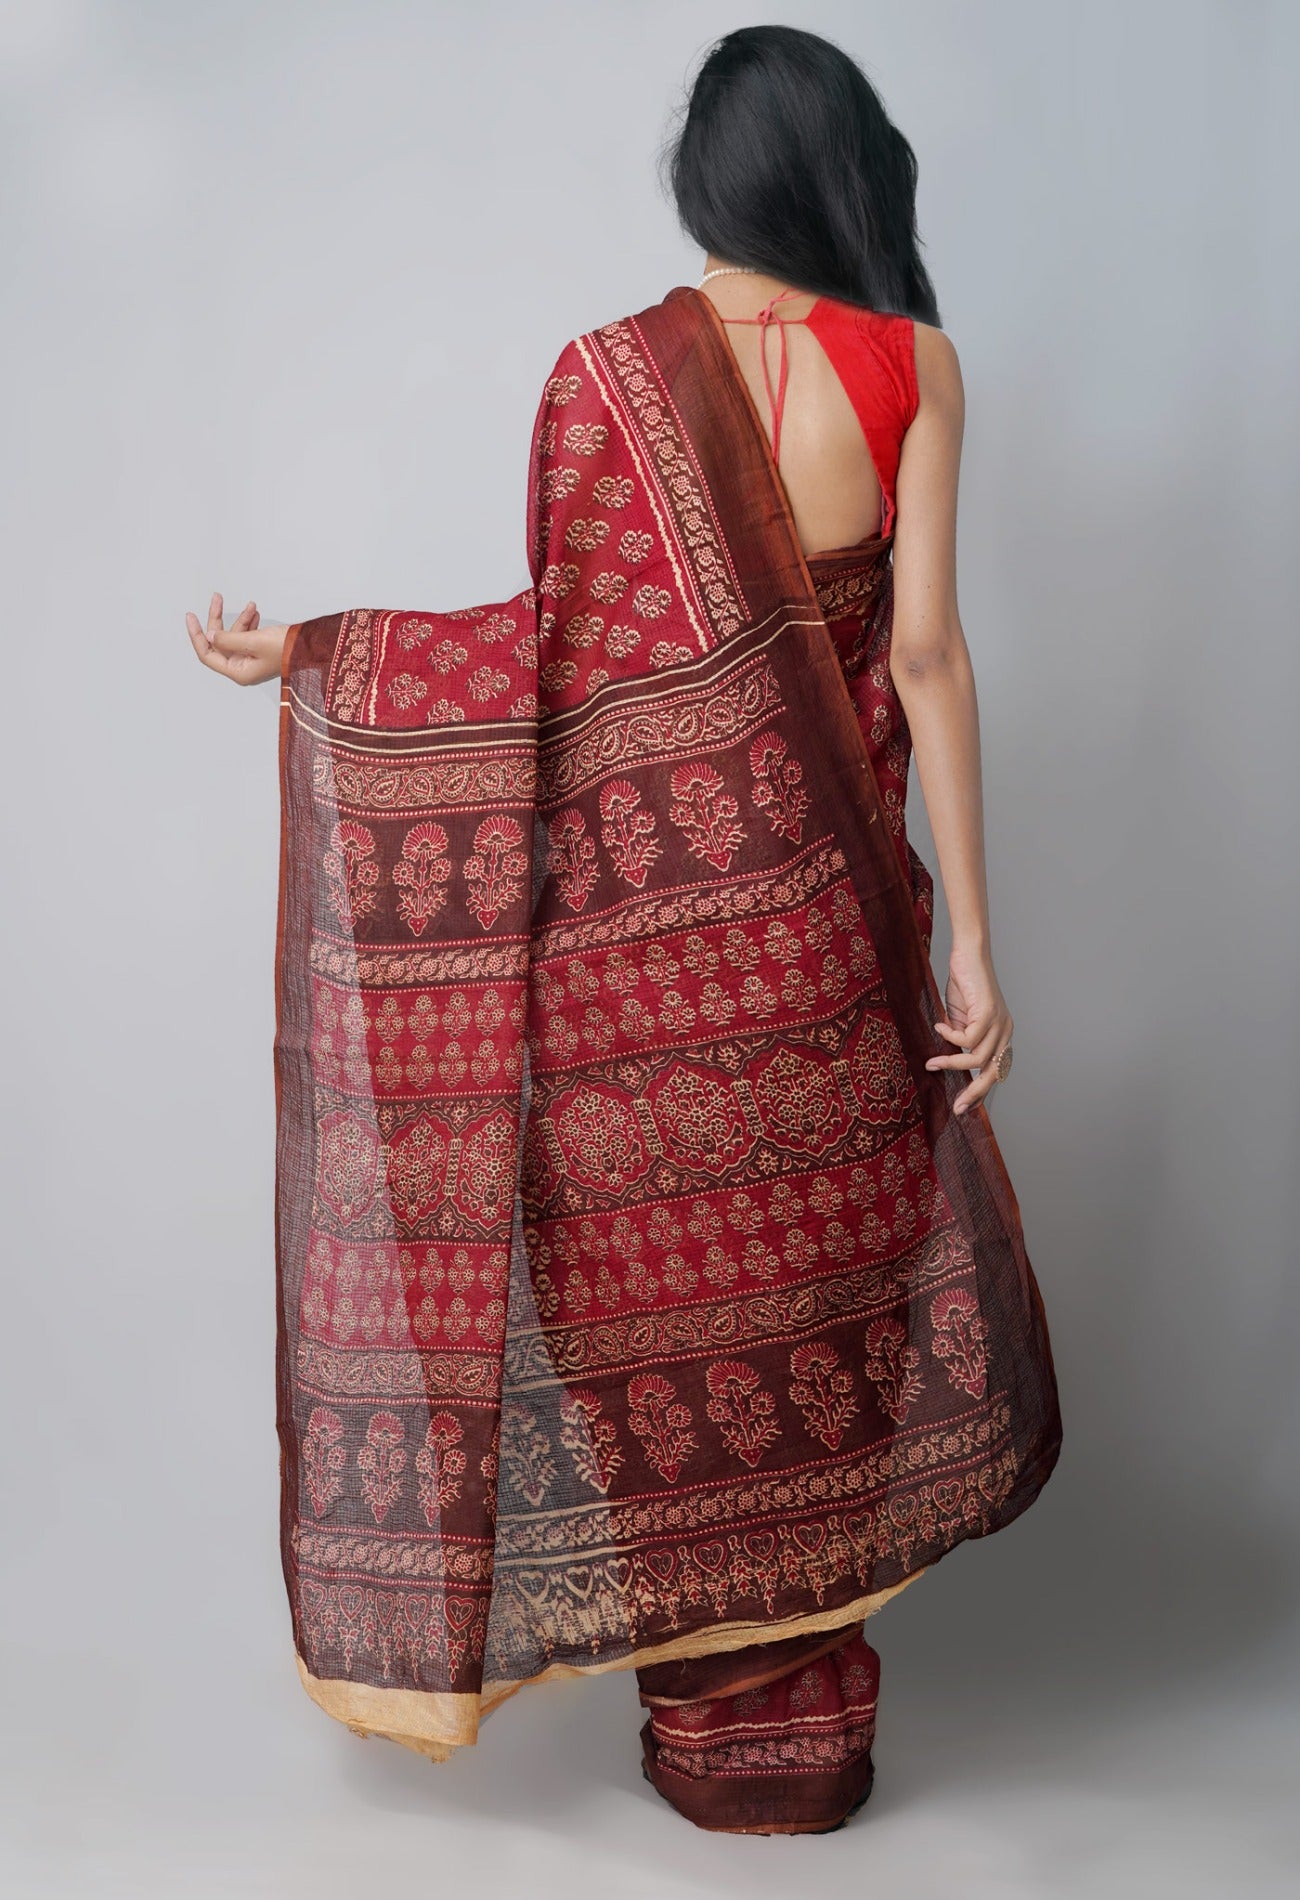 Online Shopping for Red Pure Kota With Graffiti Prints Cotton Saree with Fancy/Ethnic Prints from Rajasthan at Unnatisilks.com India
